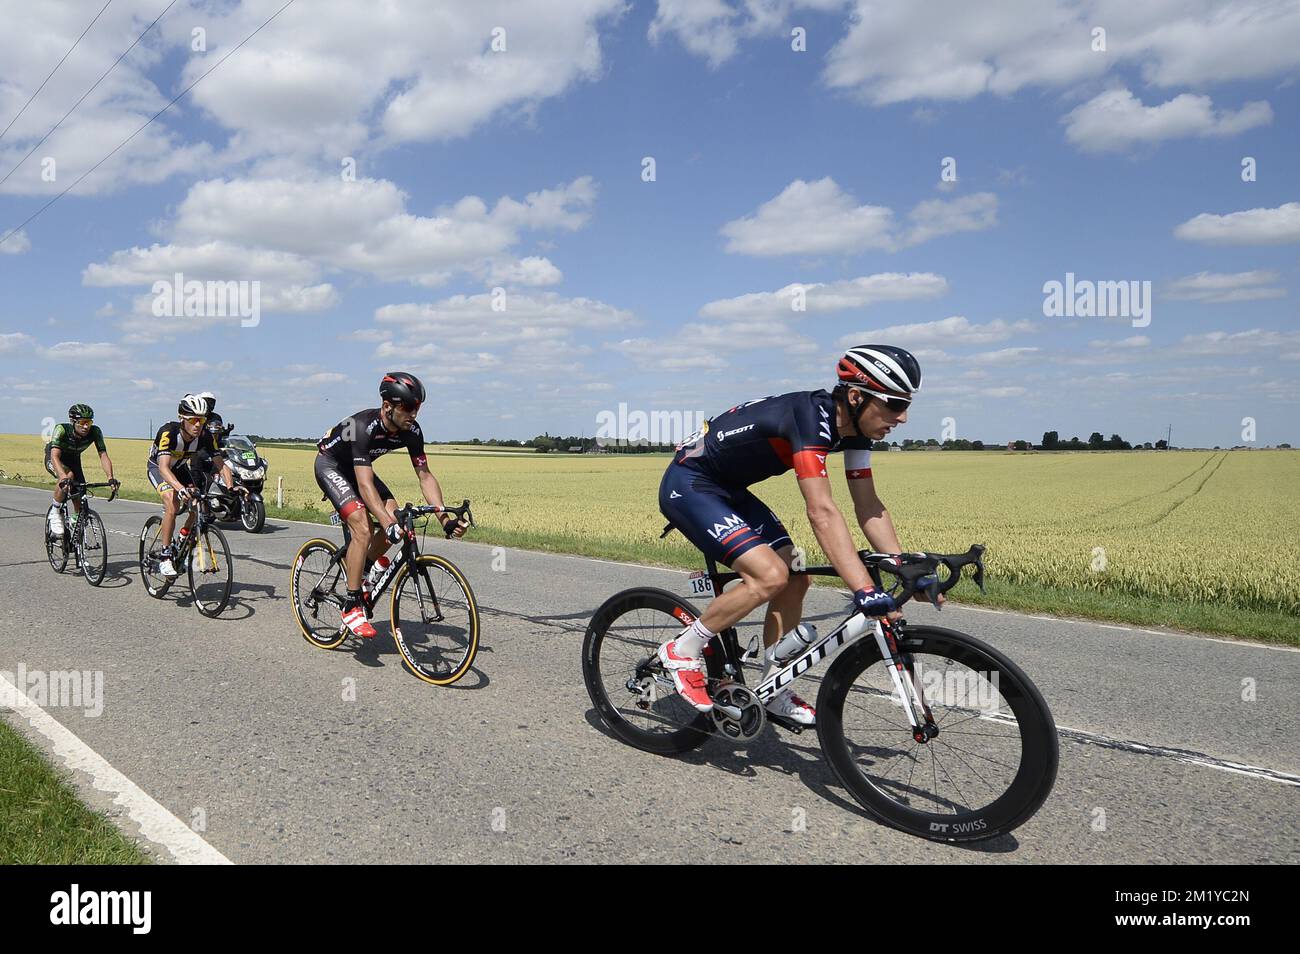 Czech Jan Barta of Bora-Argon 18 (2R) and Swiss Martin Elmiger of IAM Cycling (R) pictured in action during stage 3 of the 102nd edition of the Tour de France cycling race, 159,5 km from Antwerp to Huy, Monday 06 July 2015. This year's Tour de France is taking place from 4 to 26 July.  Stock Photo